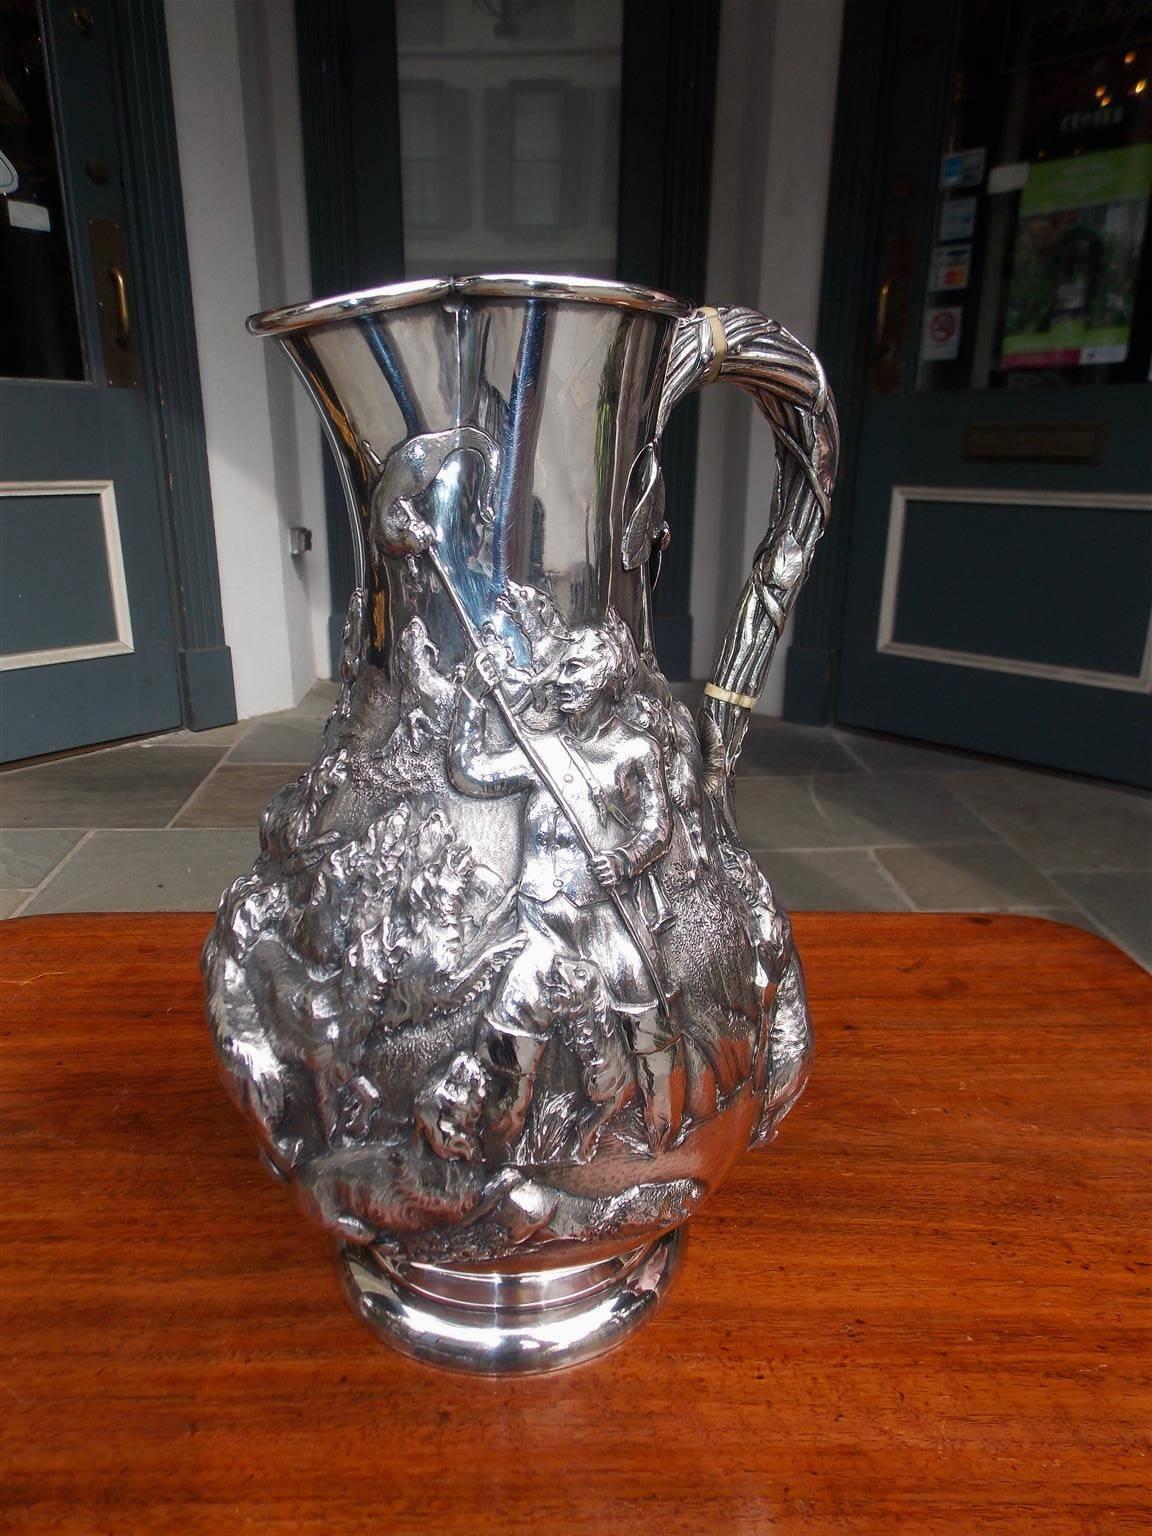 Hammered English Sterling Silver Intricately Embossed Pitcher, Circa 1780